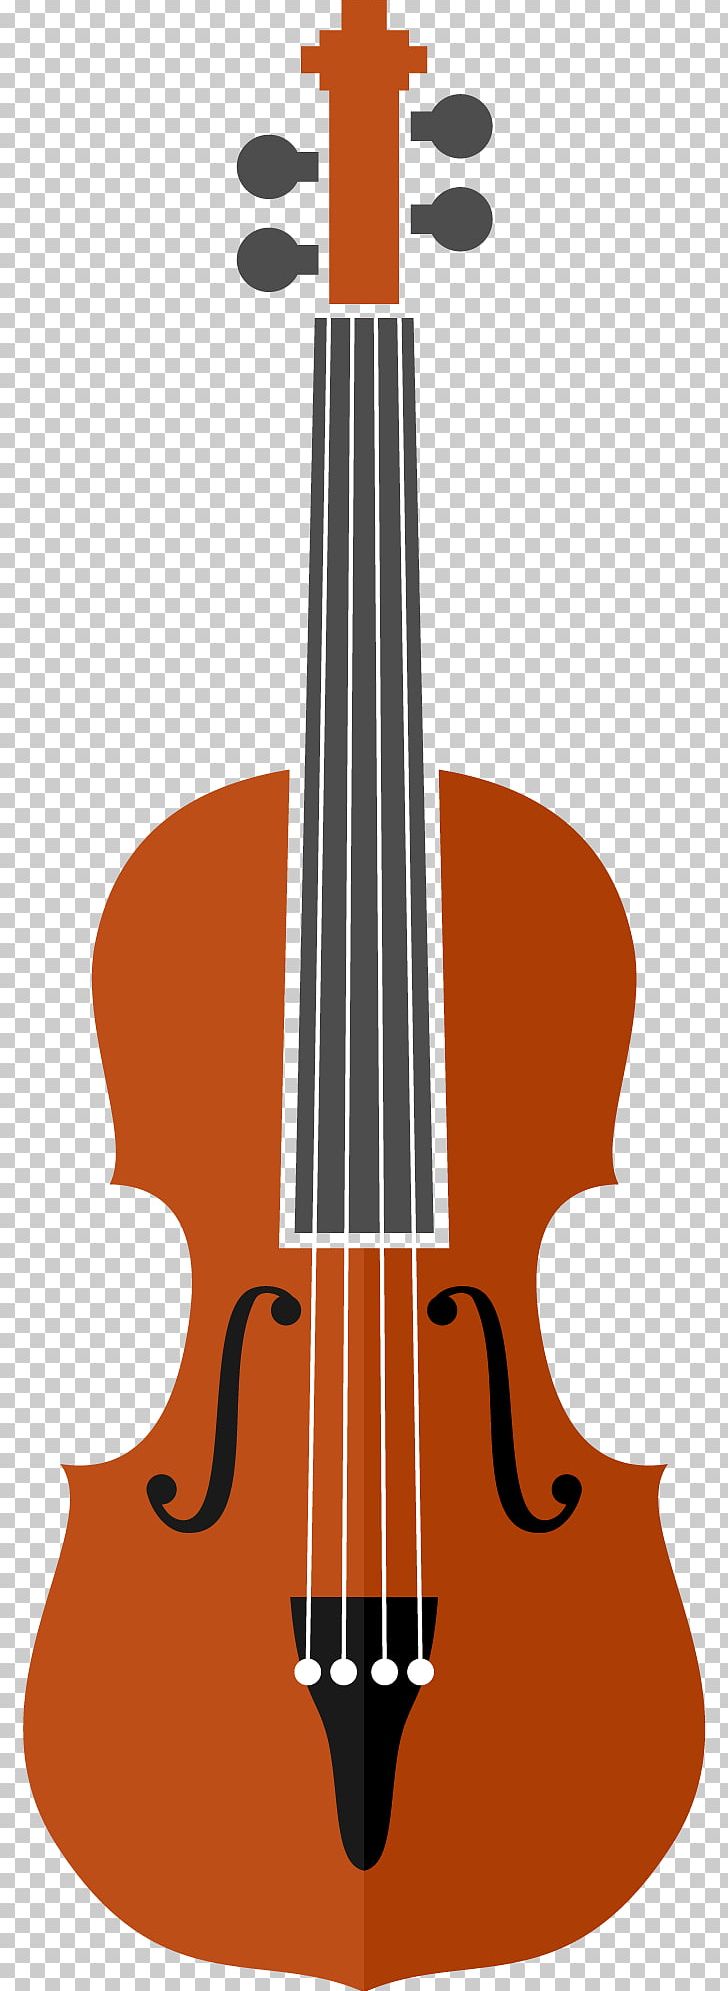 Stradivarius Violin Cello Musical Instrument Viola PNG, Clipart, Bow, Cartoon Character, Cartoon Eyes, Cartoons, Cellist Free PNG Download